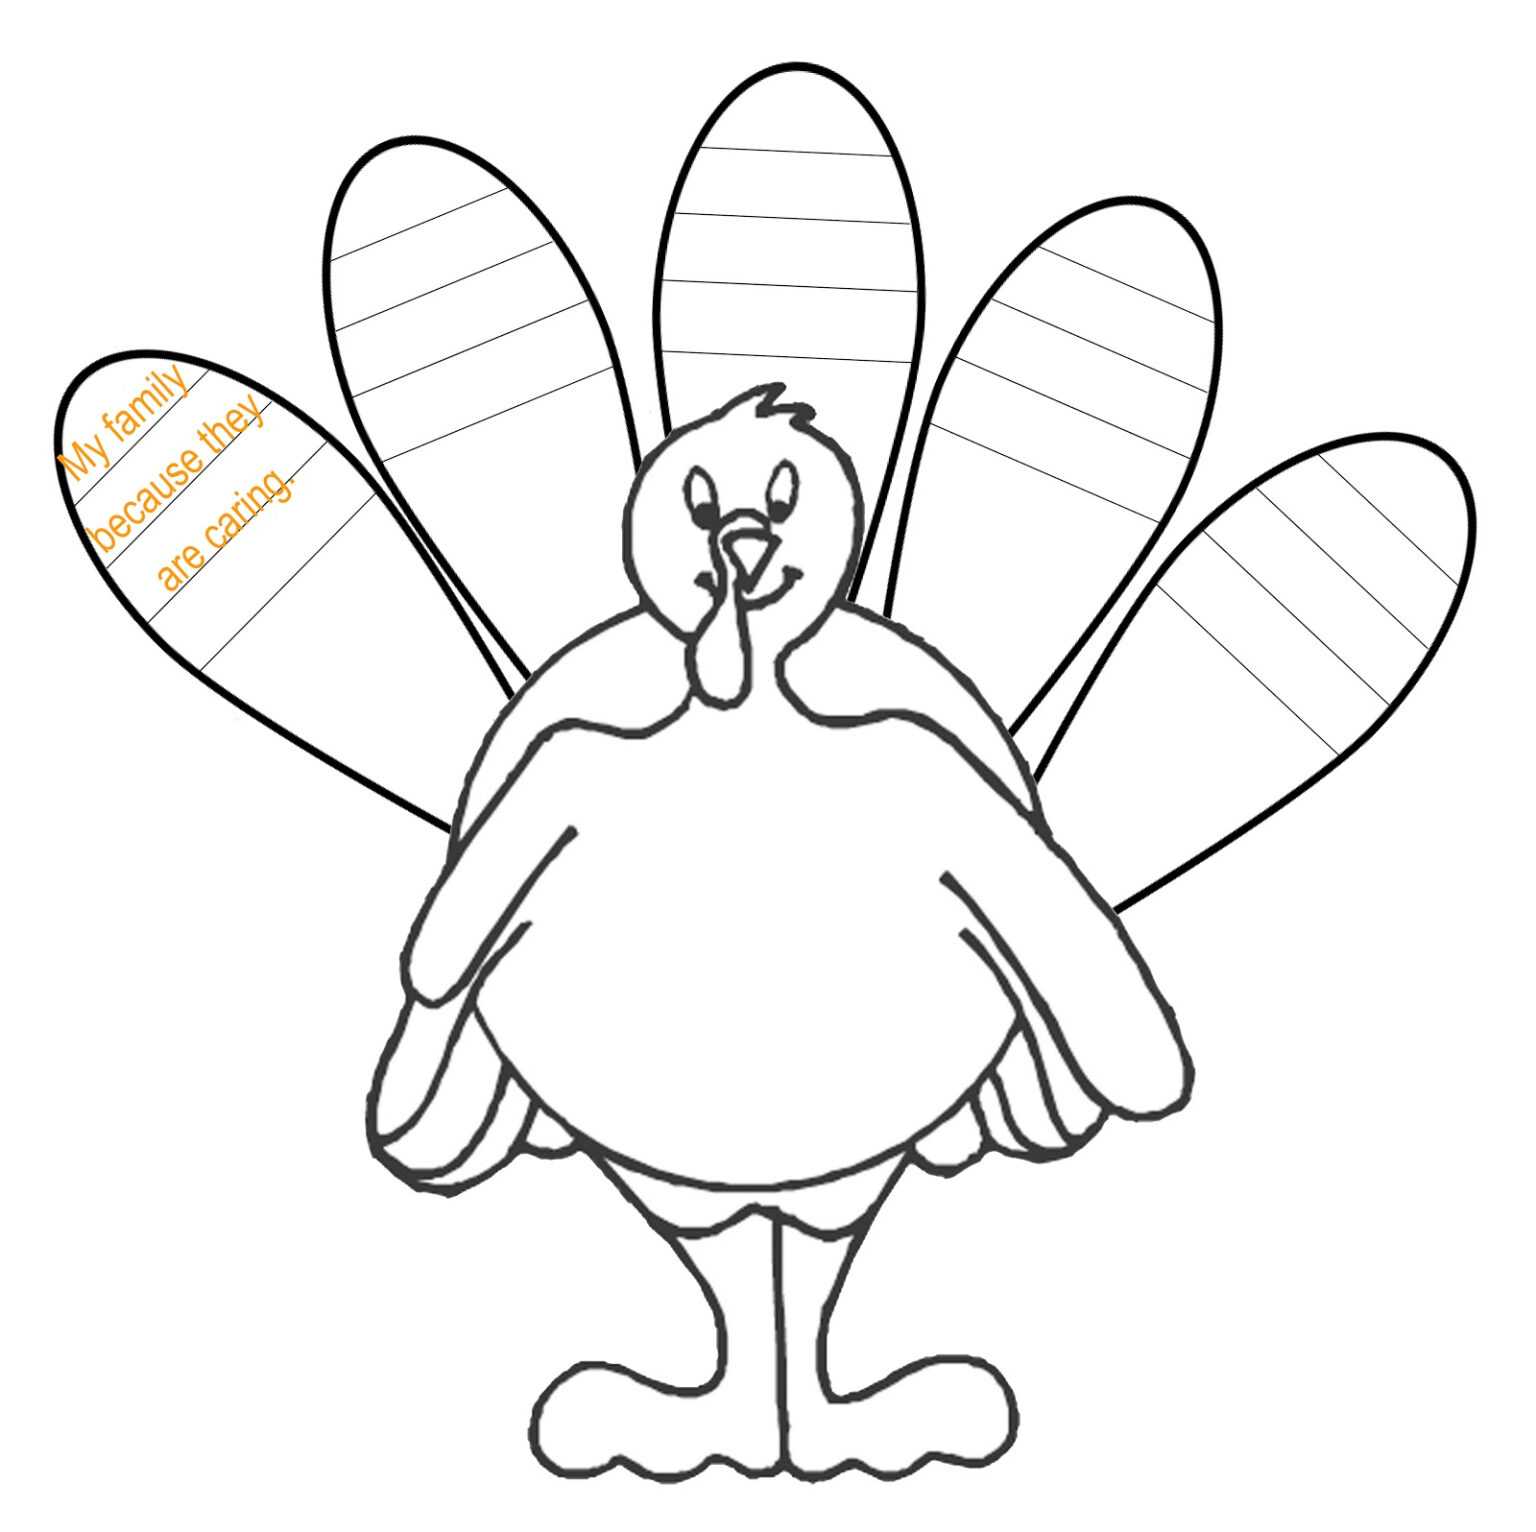 turkey-clip-art-coloring-page-picture-4554-turkey-clip-art-in-blank-turkey-template